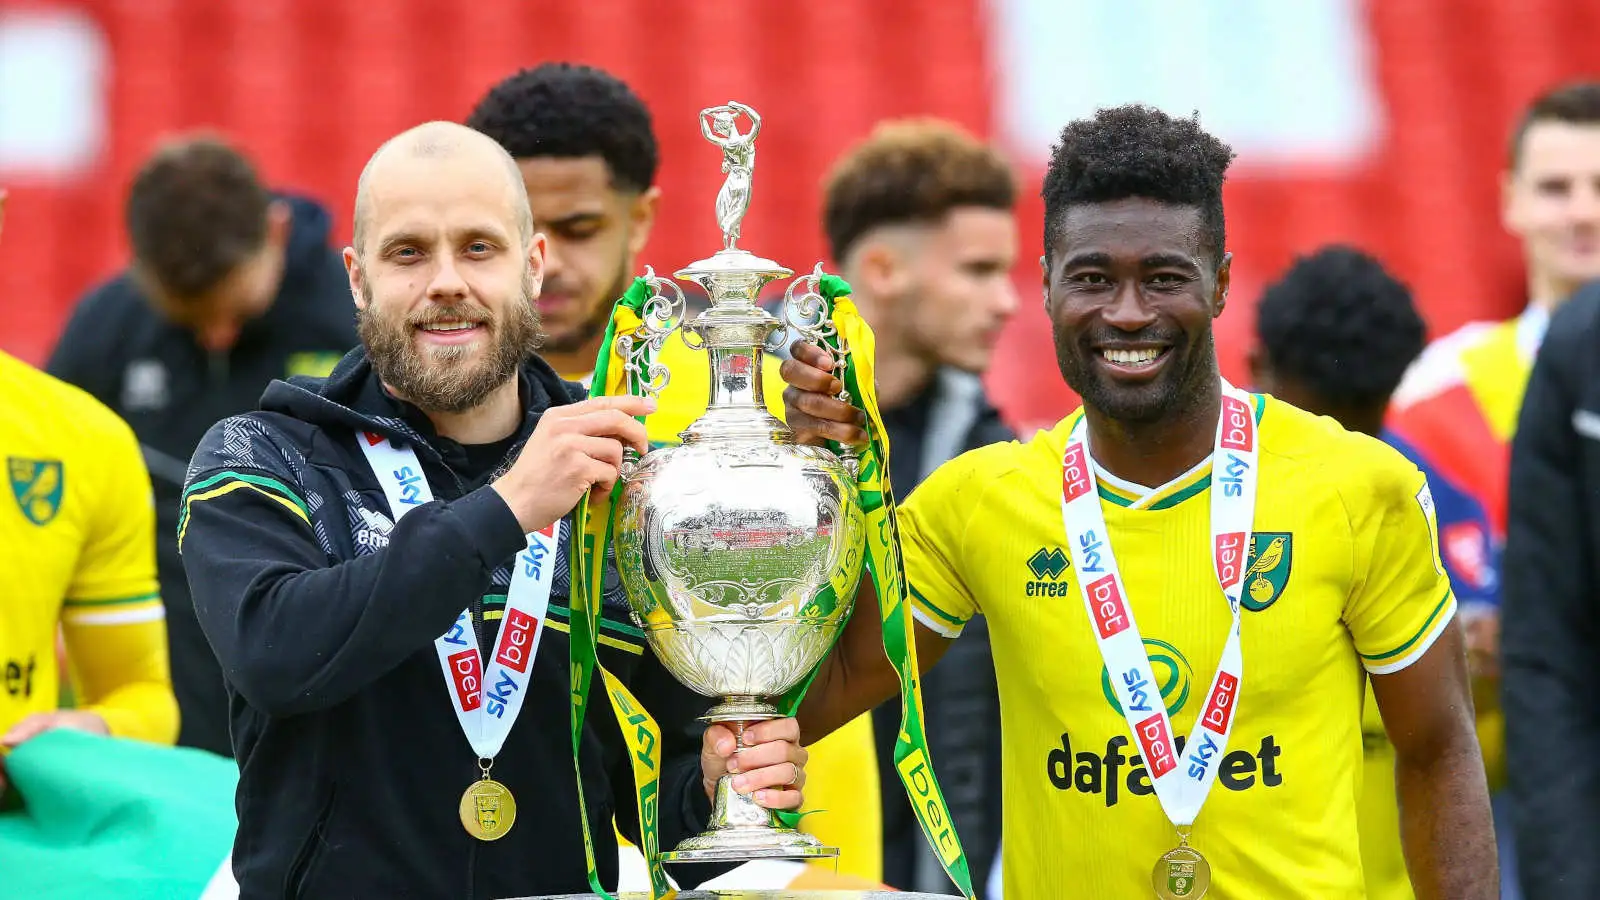 Championship 2022/23: How to watch on TV, table prediction & players to  watch